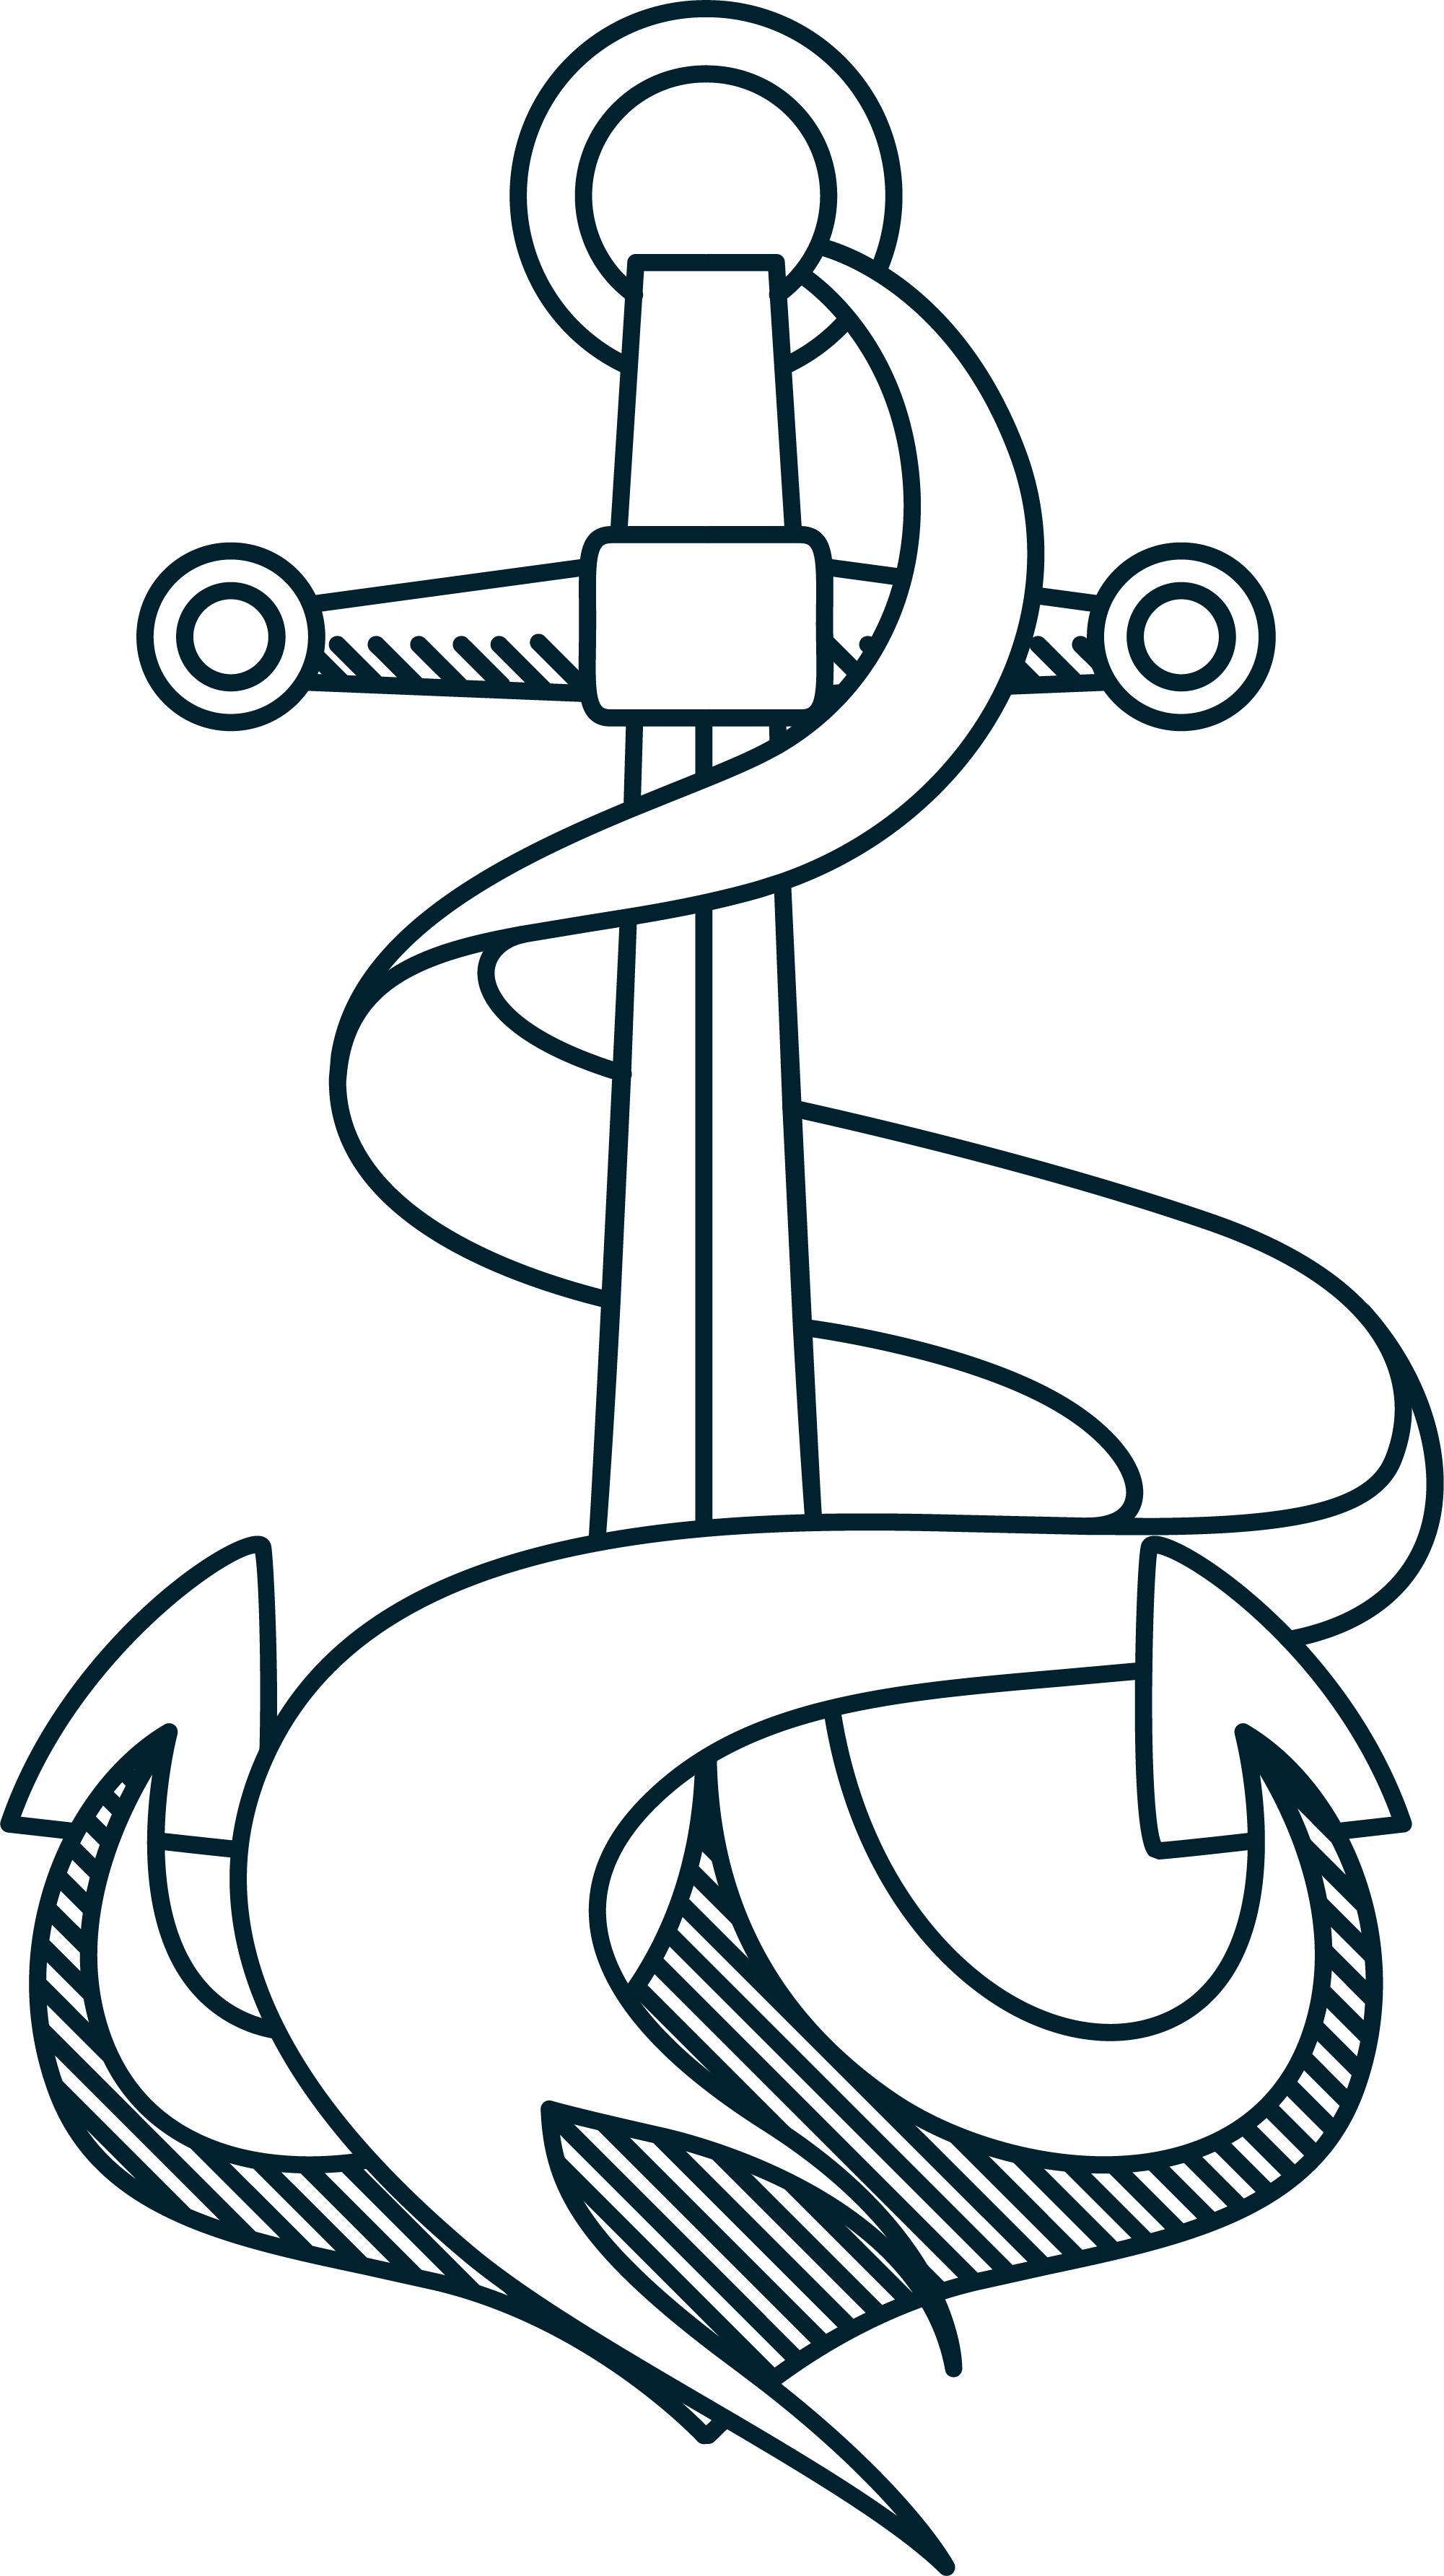 Anchor Rope Clip Art - Drawing (2001x3570)